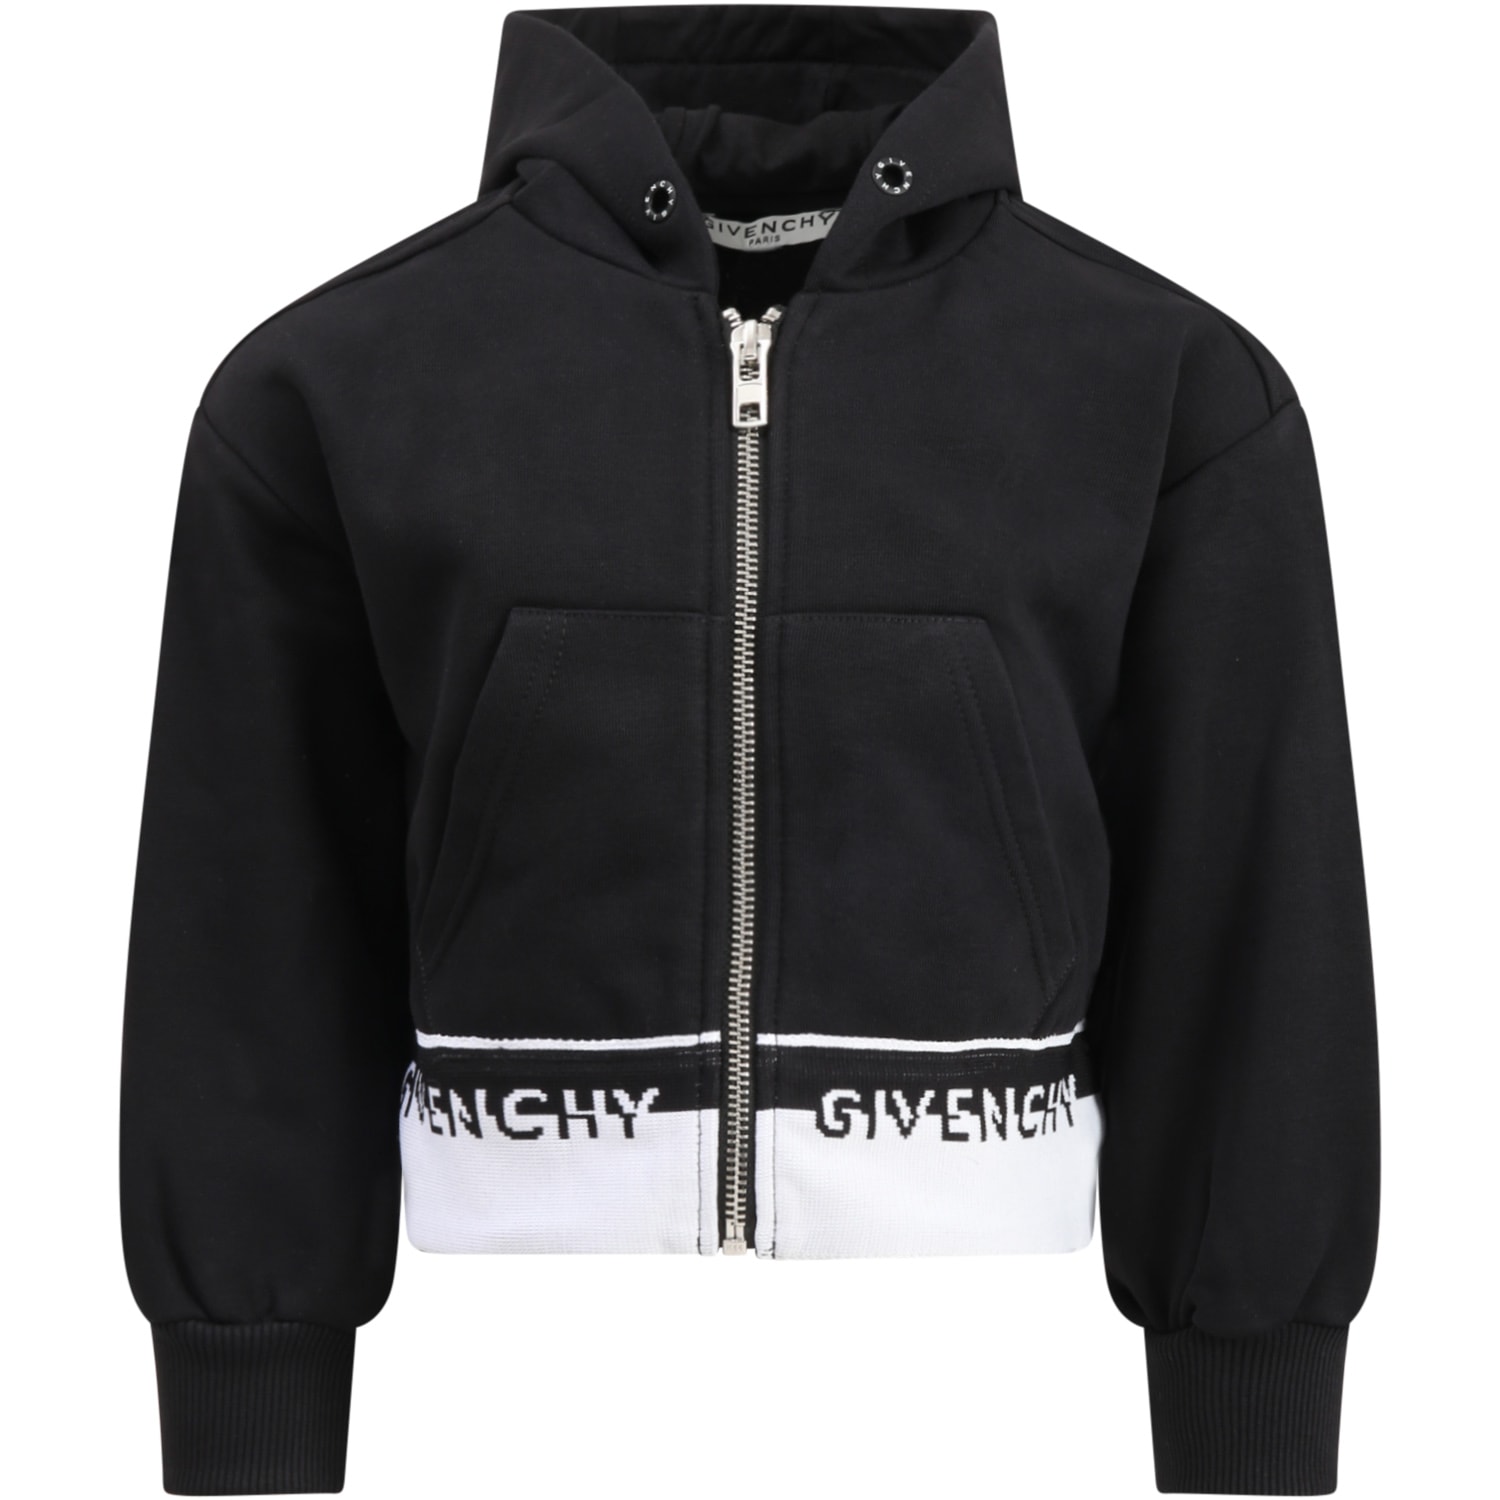 Givenchy Black Sweatshirt For Girl With Logos